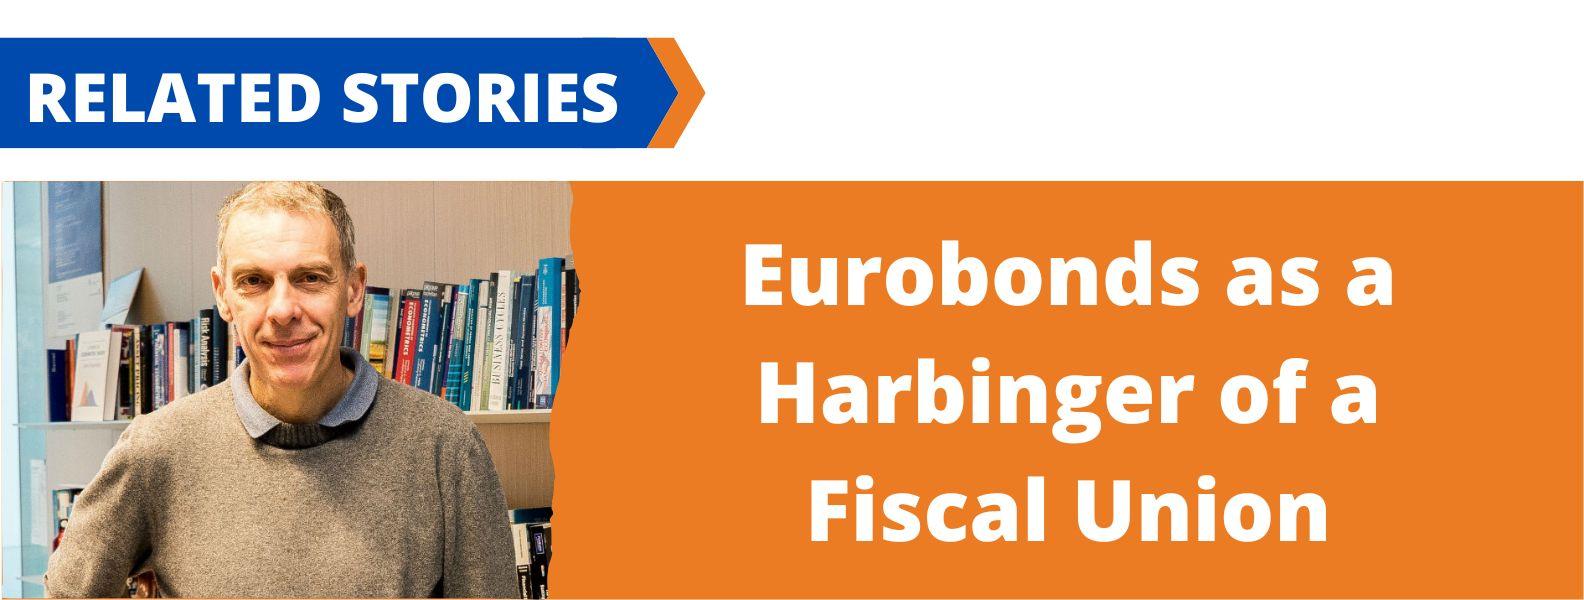 Link to related stories. Image: Carlo Favero. Story headline: Eurobonds as a Harbinger of a Fiscal Union